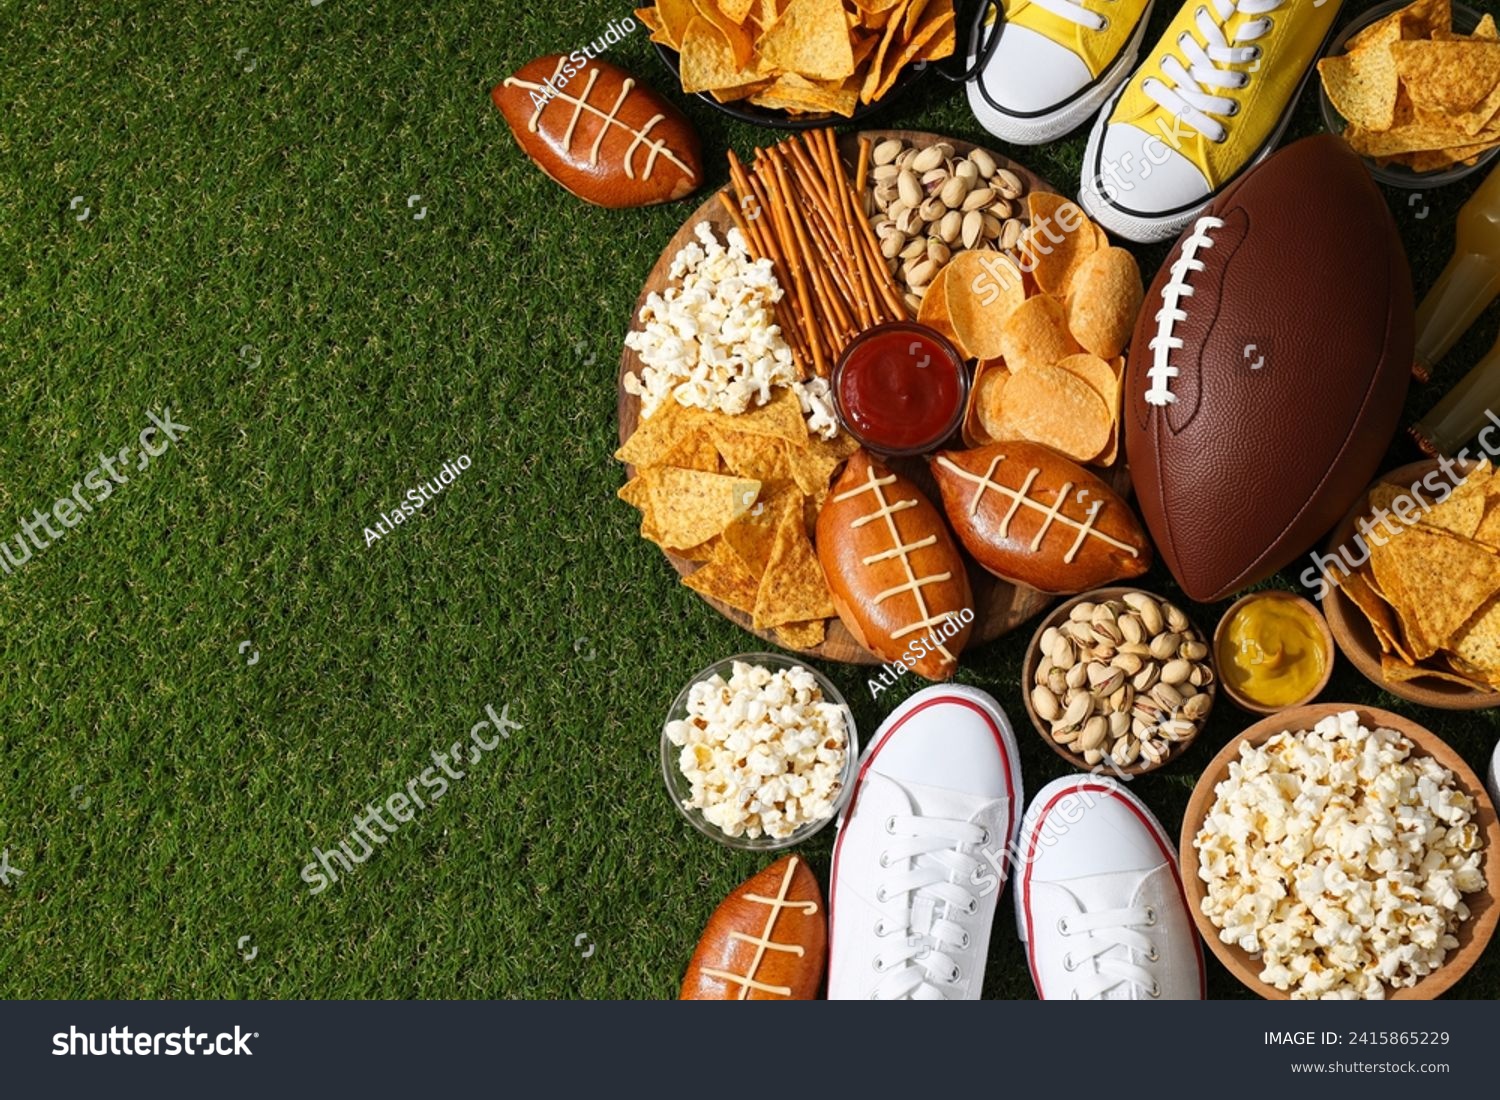 A bowl with various beer snacks and a rugby ball on the grass #2415865229